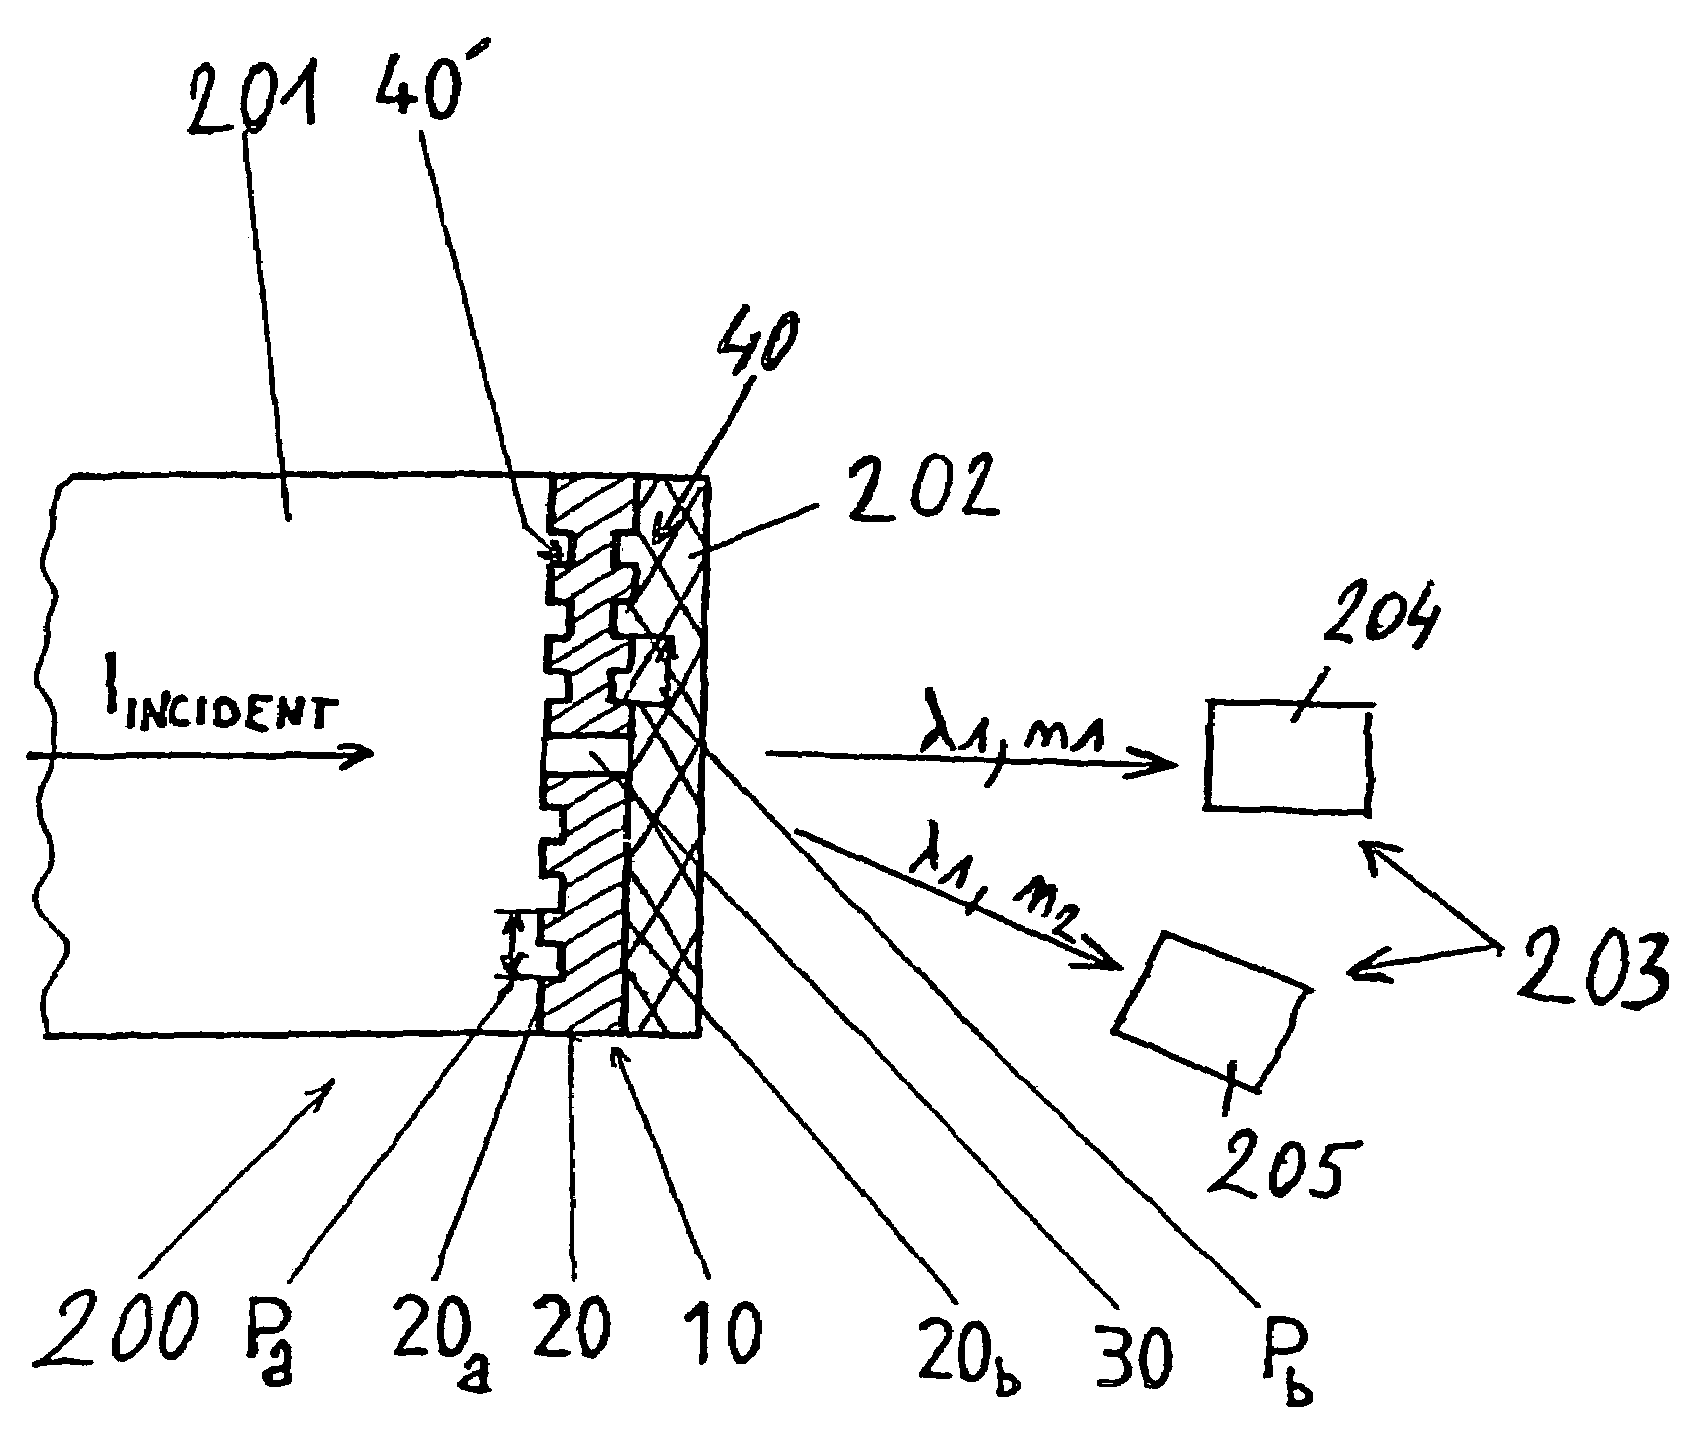 Optical transmission apparatus with directionality and divergence control